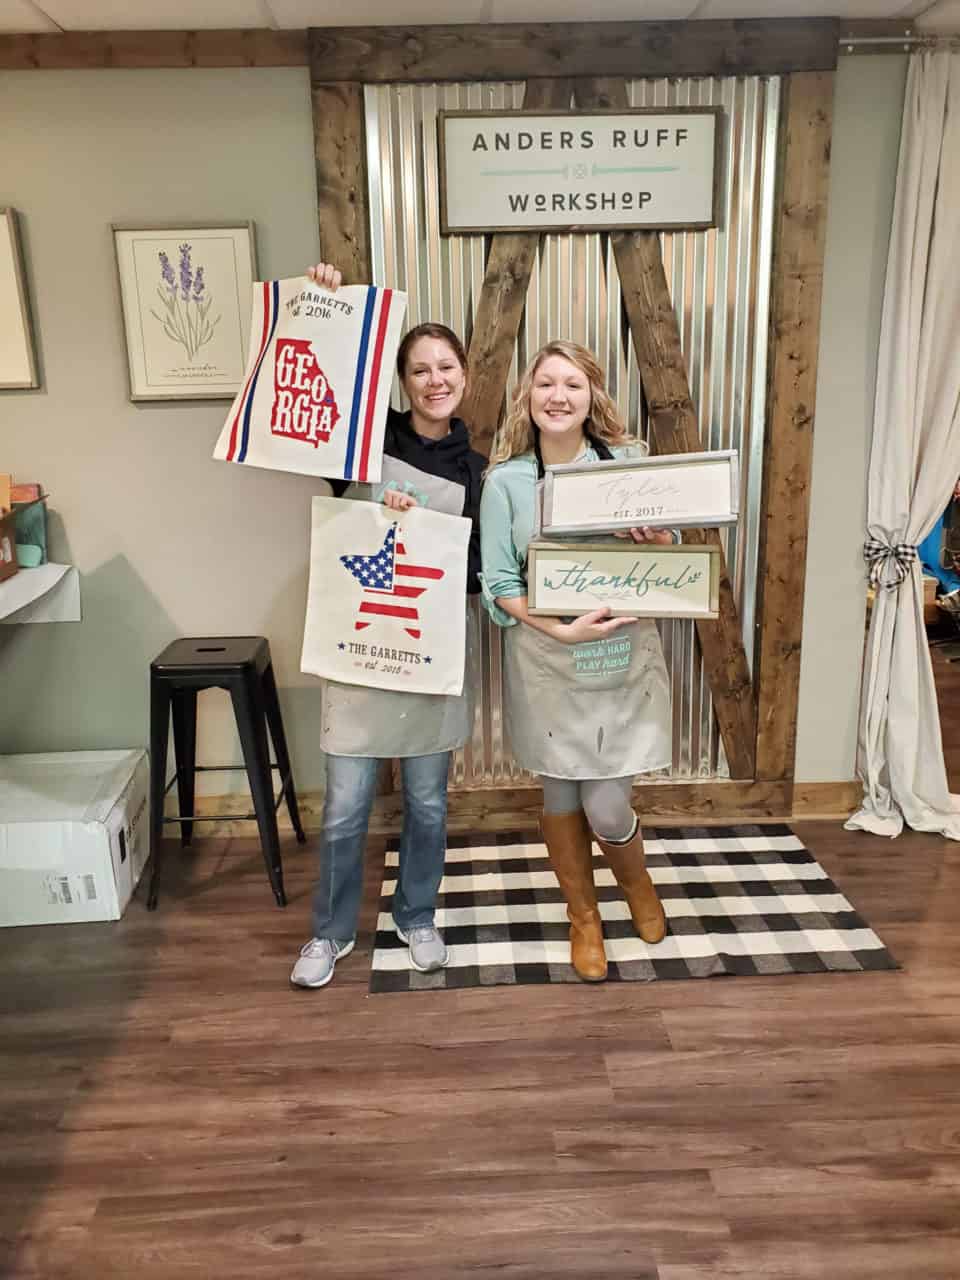 Me and My Cousin Doing an AR Workshop Project. She Made Pillows, I Made Some Cute Signs For My House.